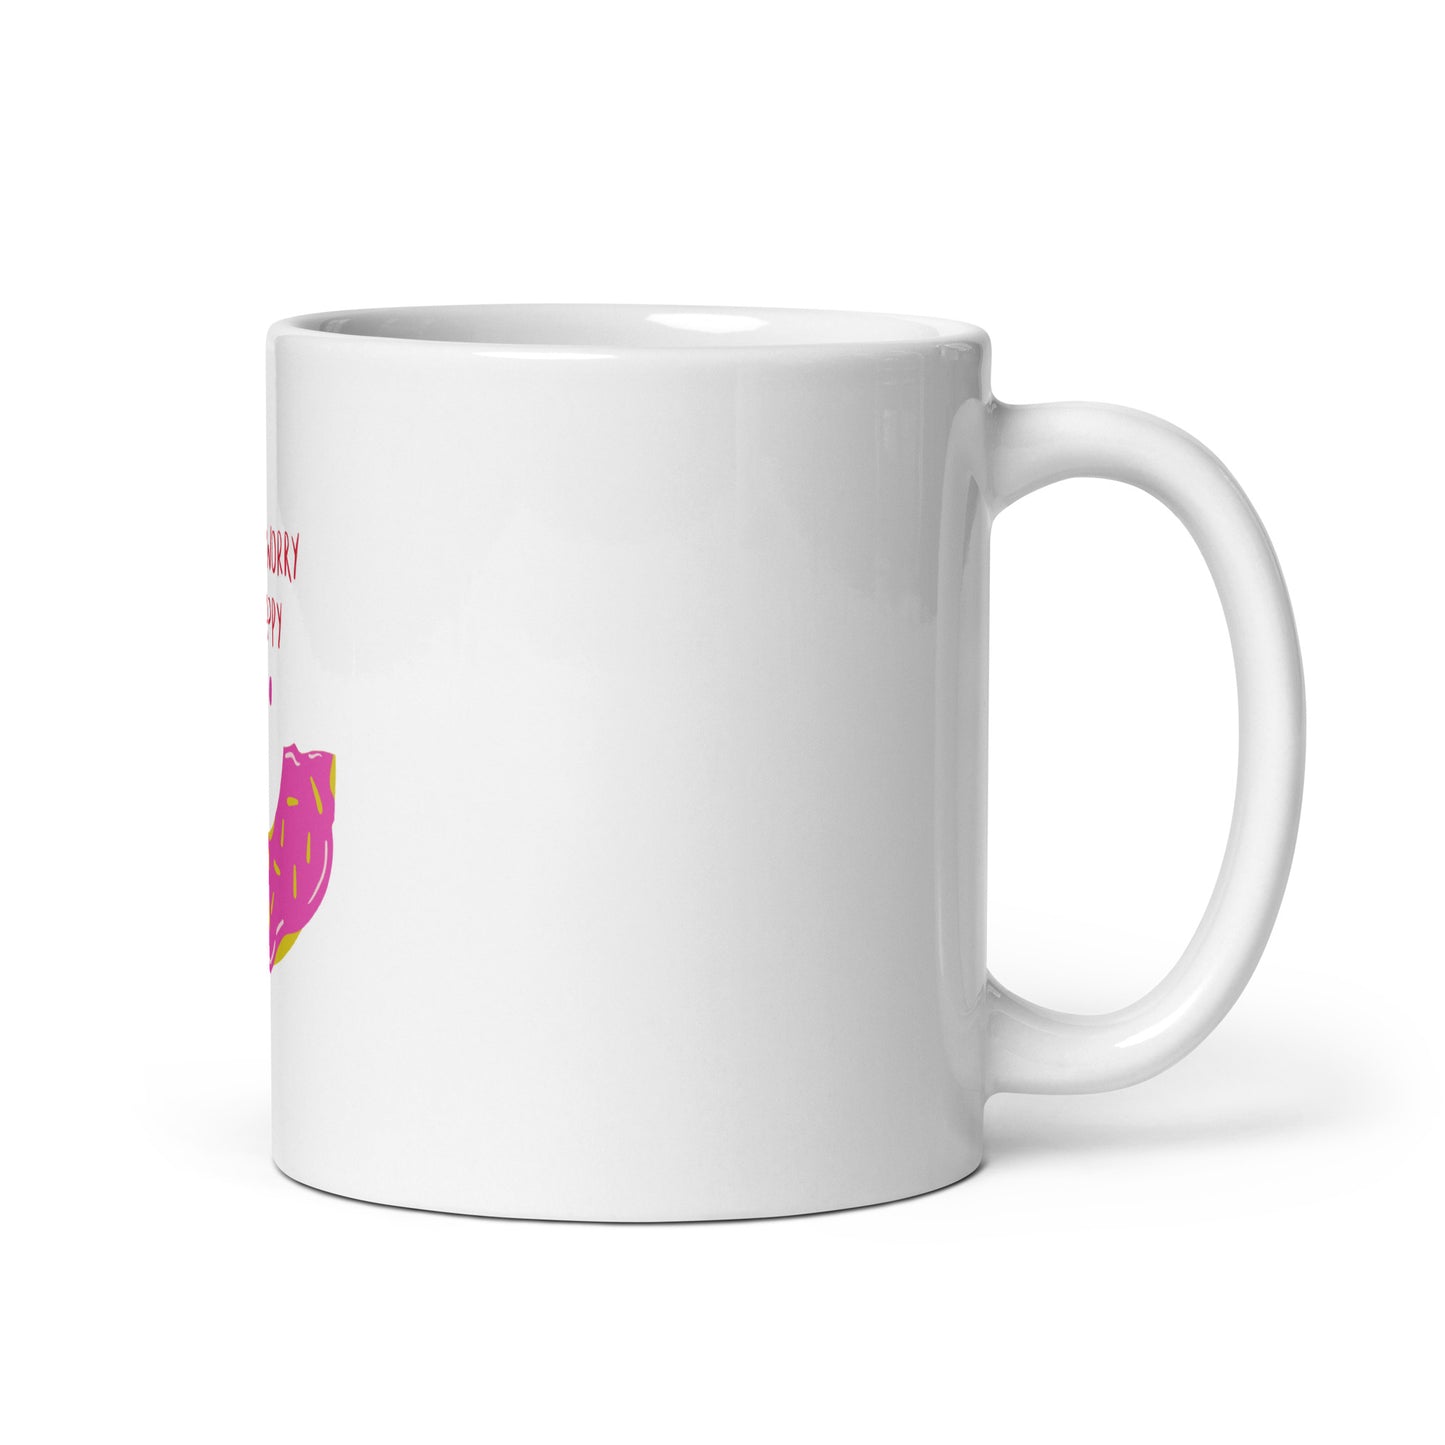 Donut Worry, Be Happy - White Glossy Mug for Positive Vibes | Cheerful Gift Idea